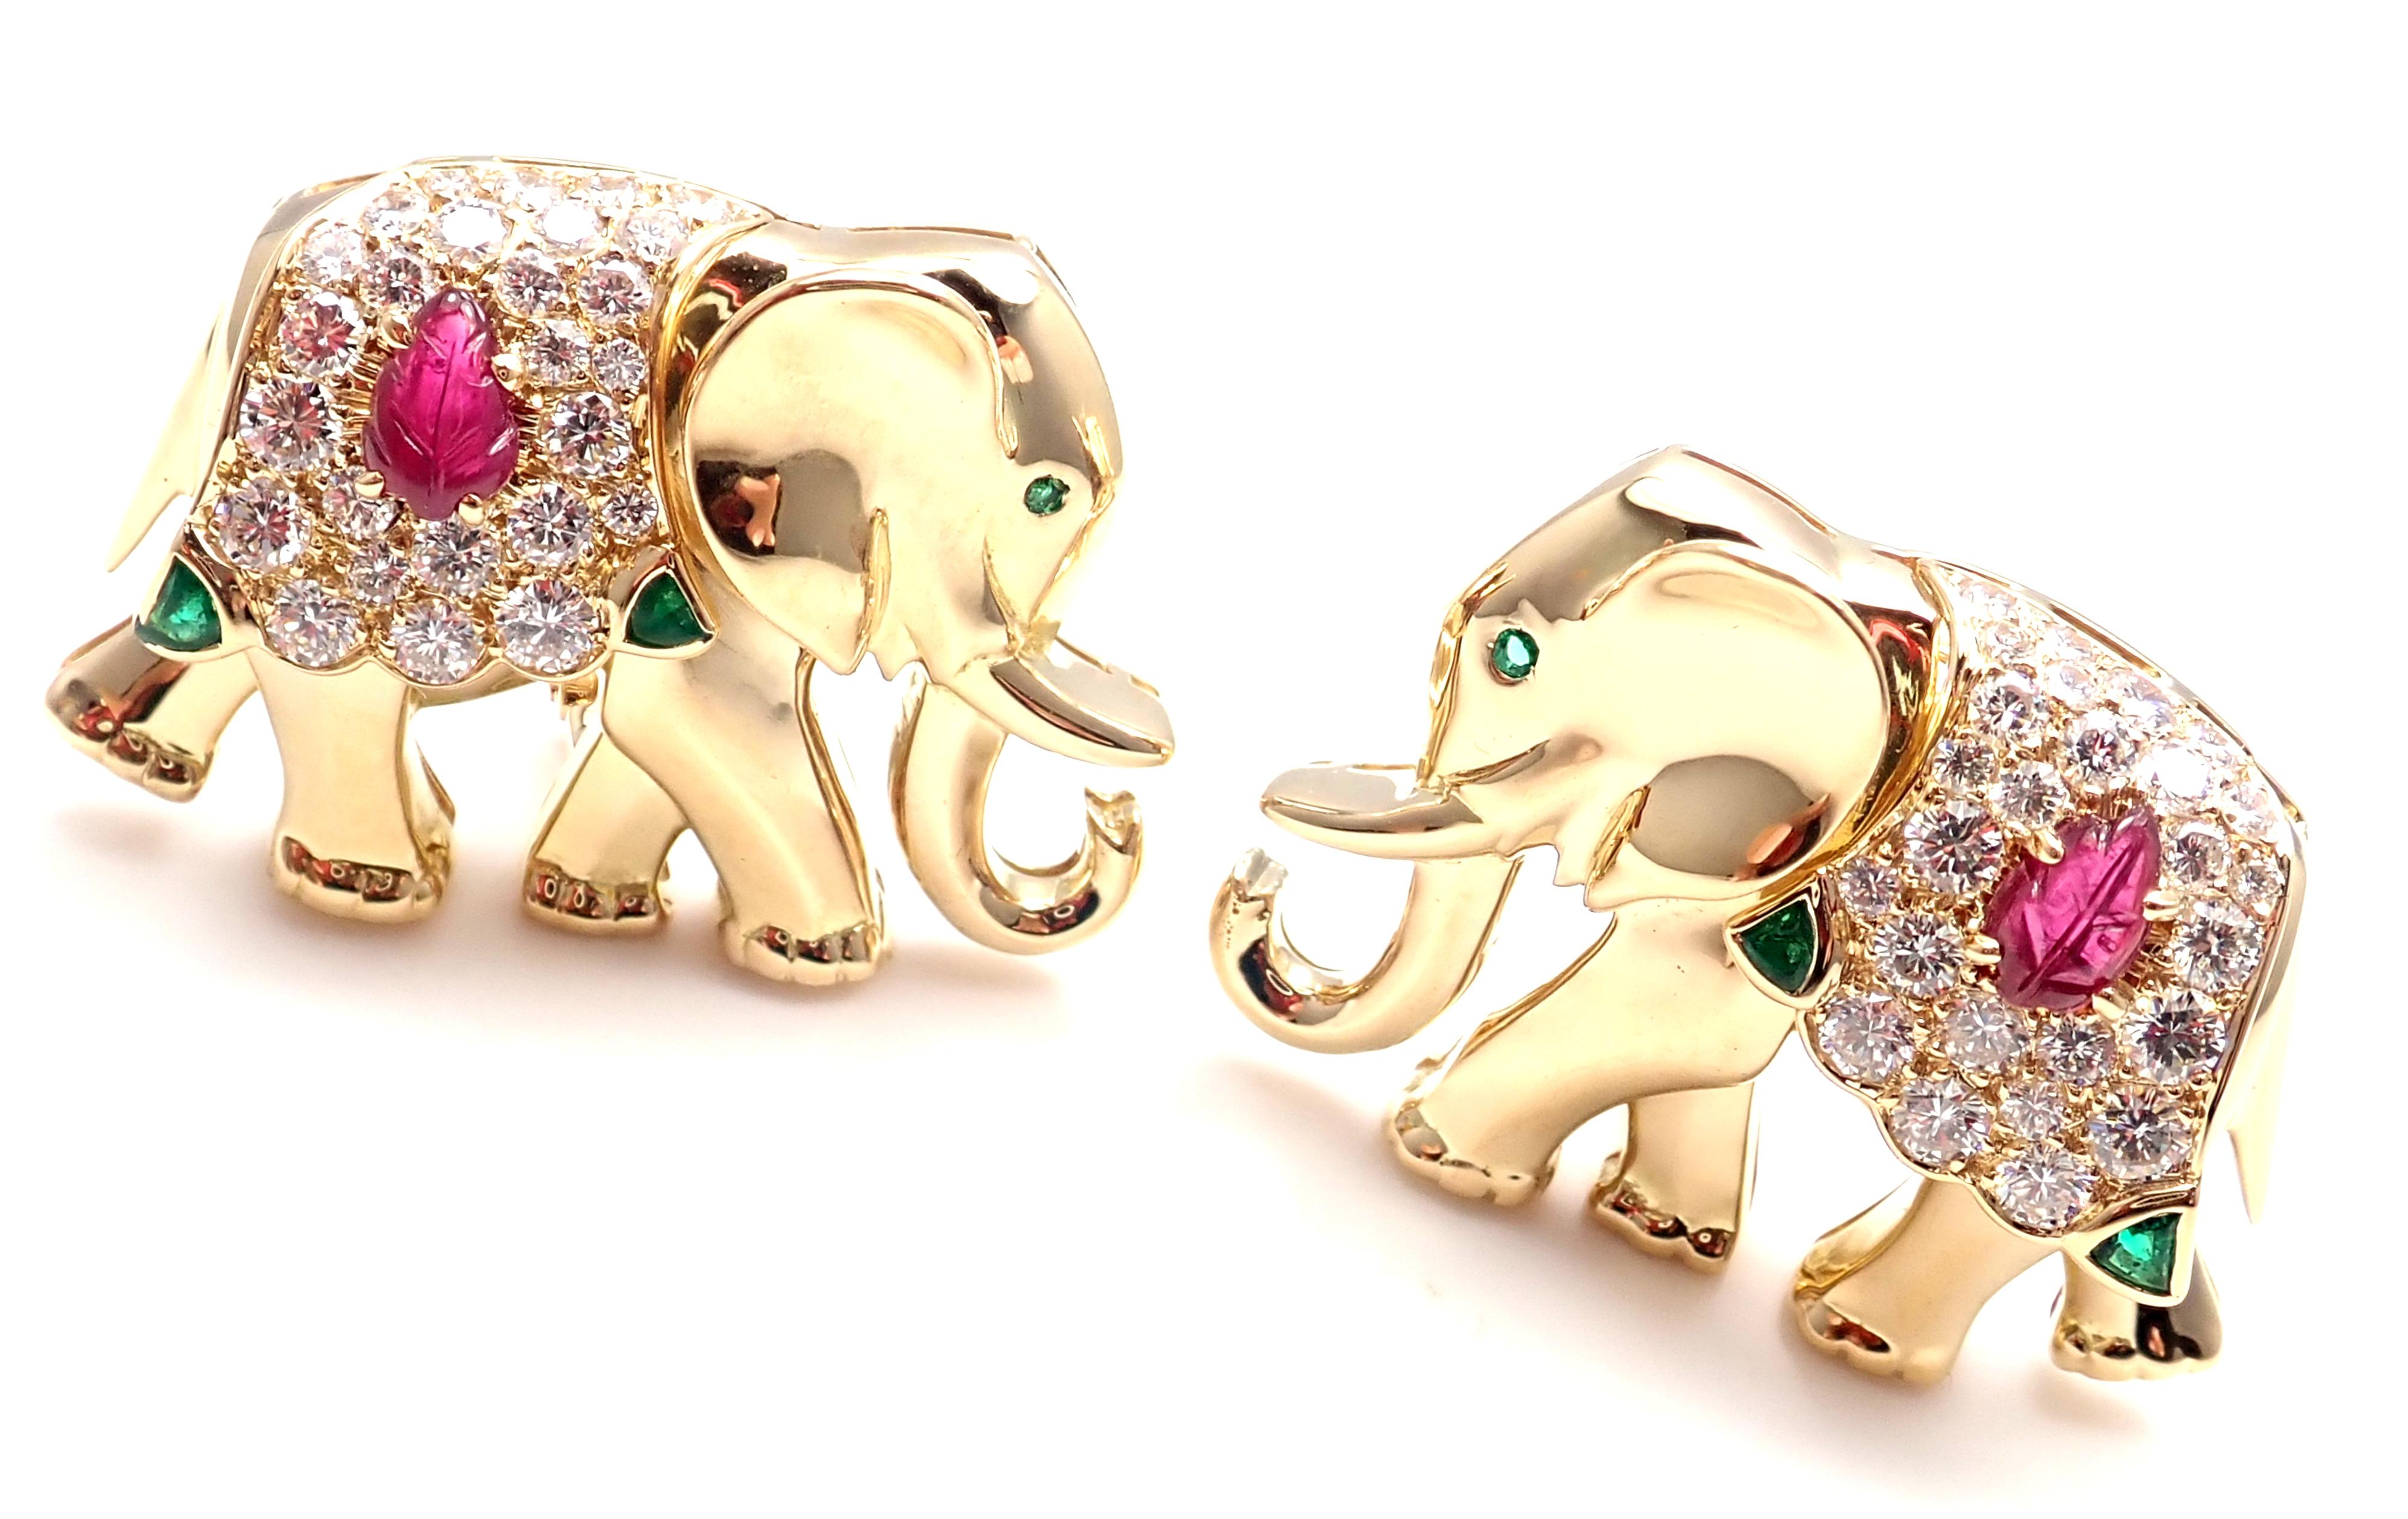 18k Yellow Gold Diamond Ruby Emerald Vintage Large Elephant Earrings by Cartier. 
With 48 round brilliant cut diamonds VVS1 clarity, E color total weight approx. 2ct
2 carved rubies 6mm x 4mm each
6 emeralds
***These earrings are made for pierced